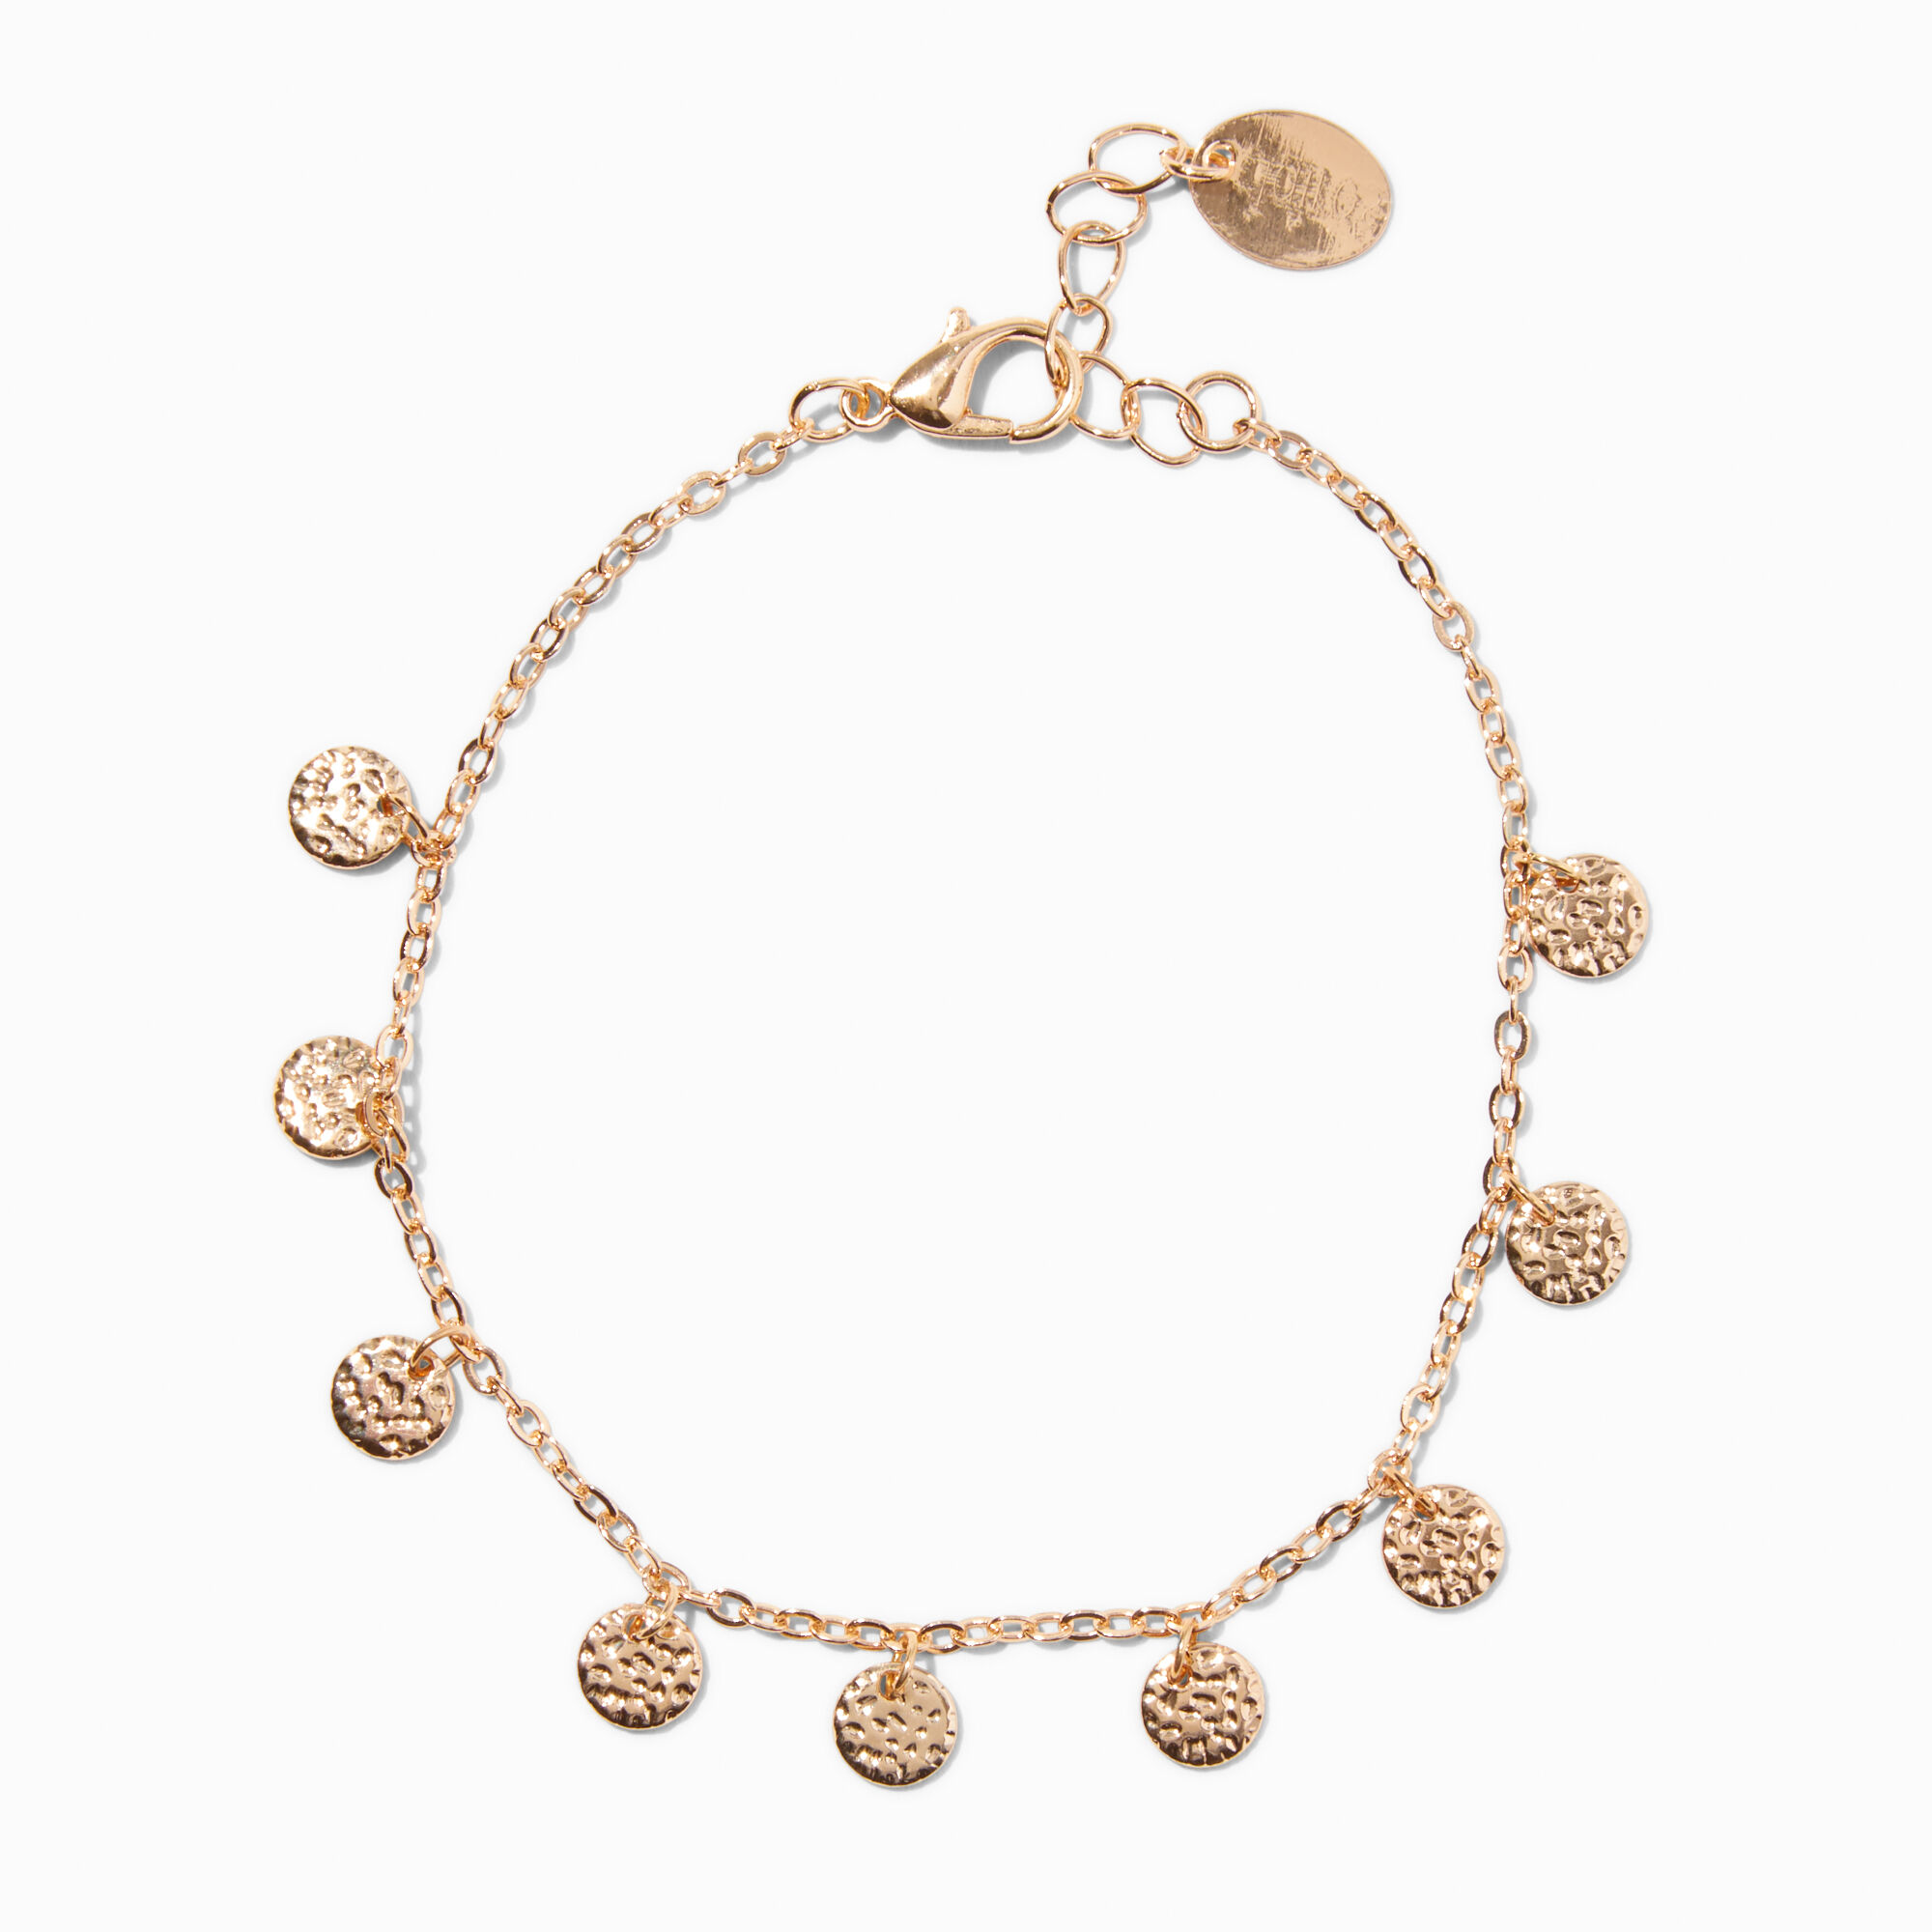 View Claires Tone Textured Coin Chain Bracelet Gold information